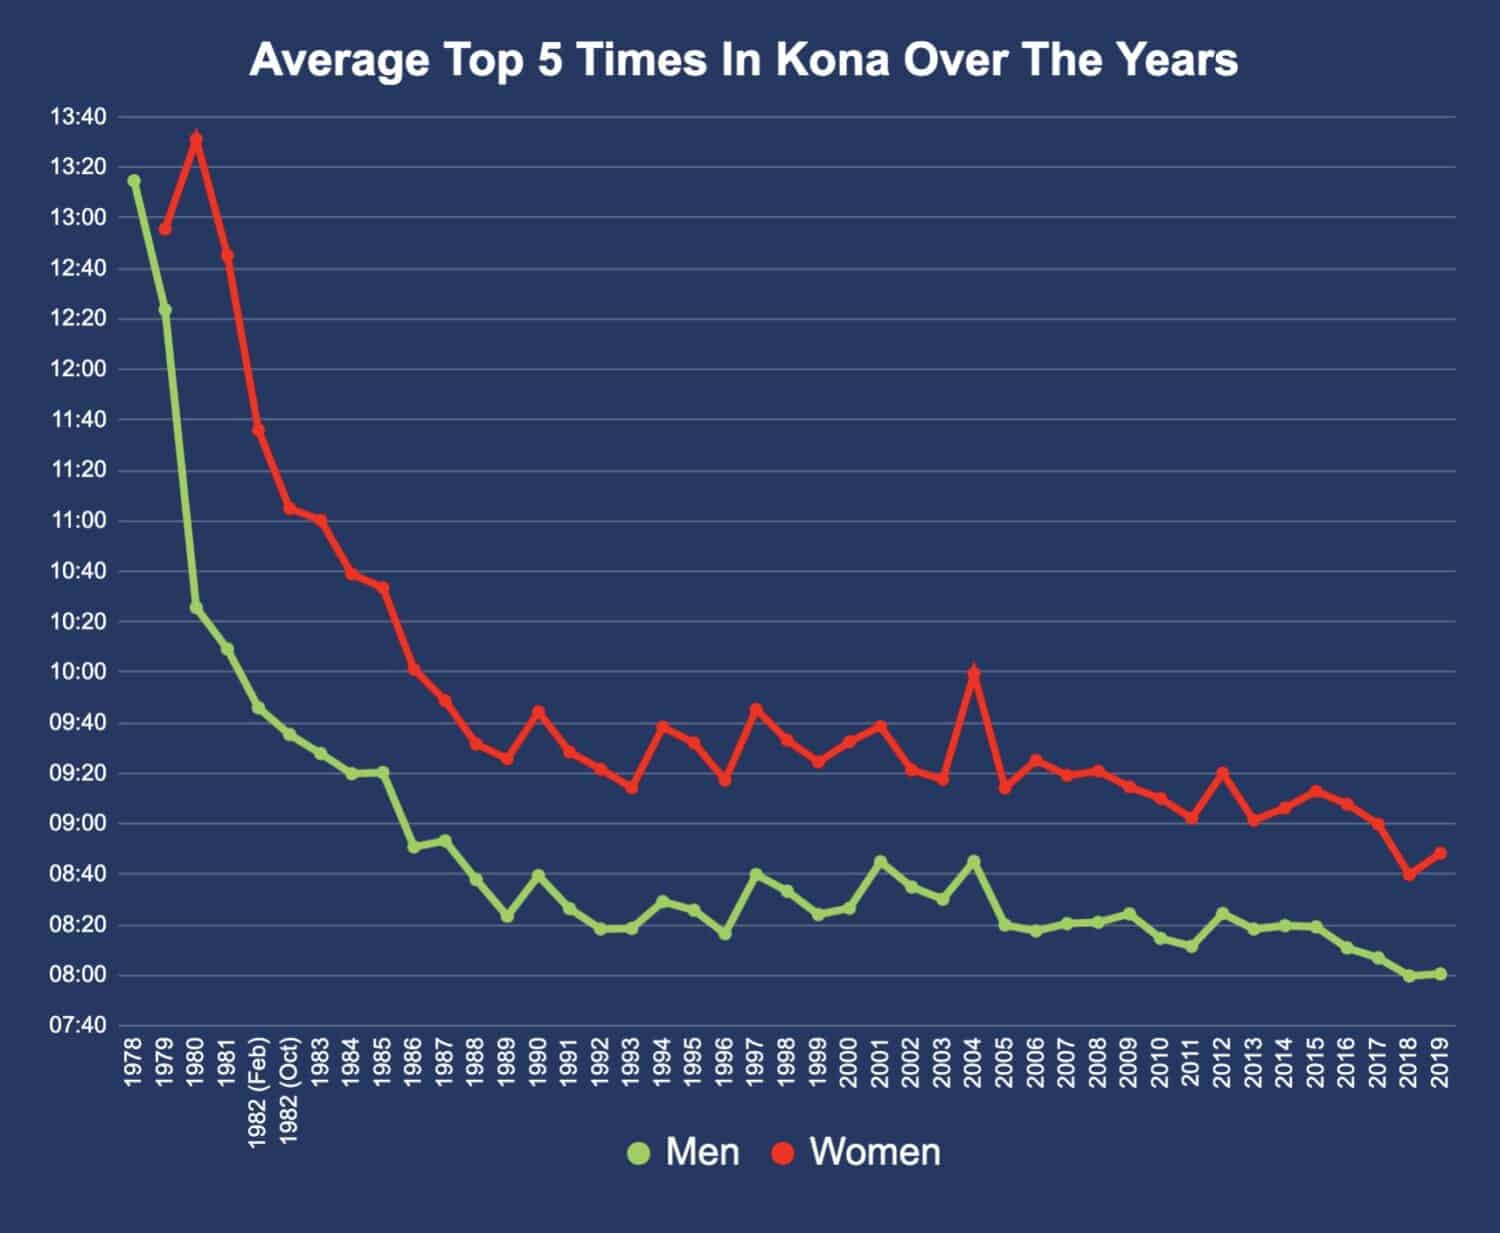 Average Top 5 Times In Kona Over The Years (1978-2019)